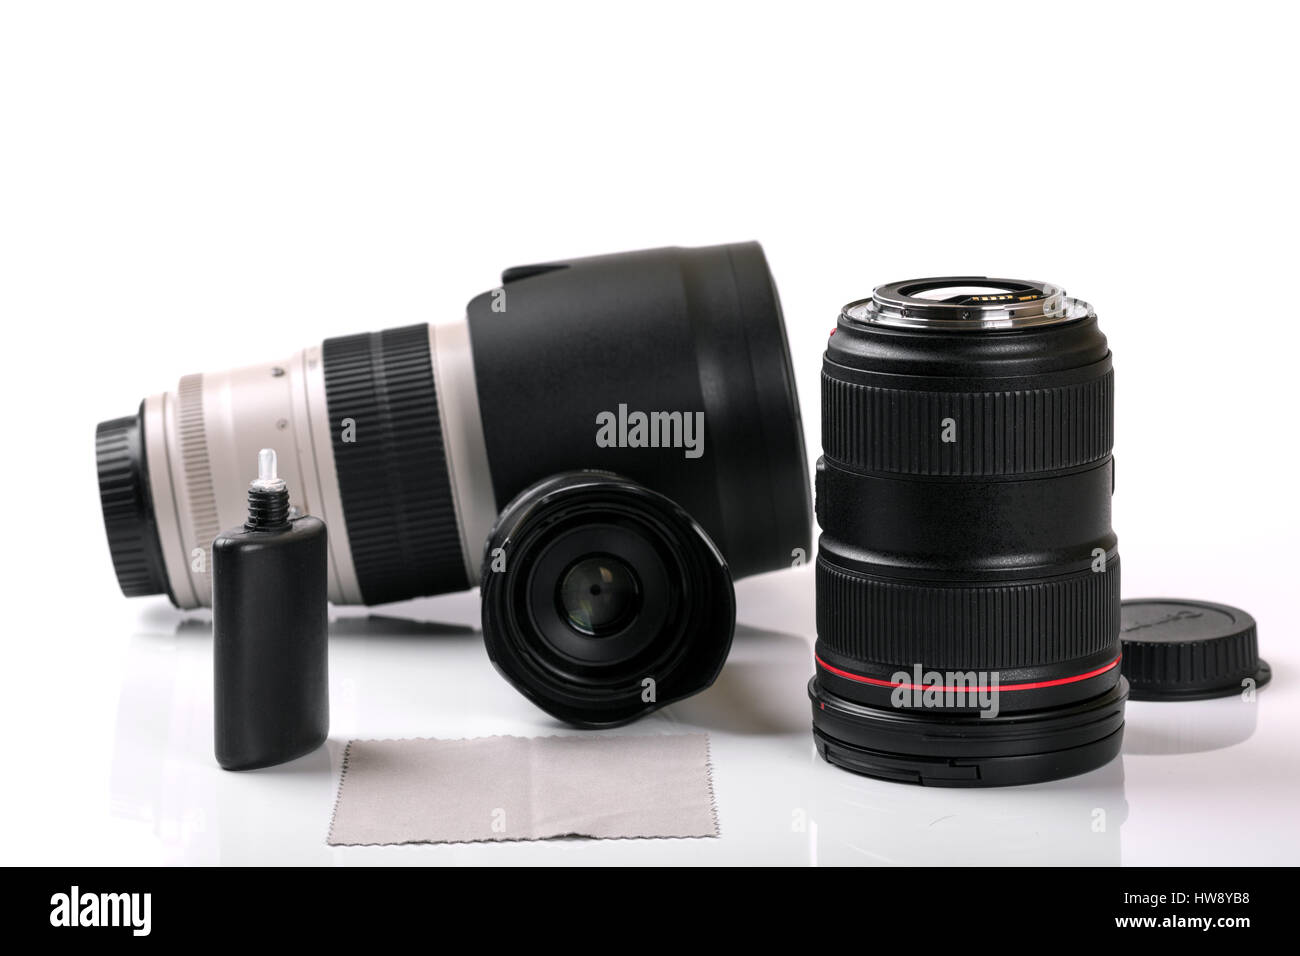 camera lenses and cleaning equipment Stock Photo